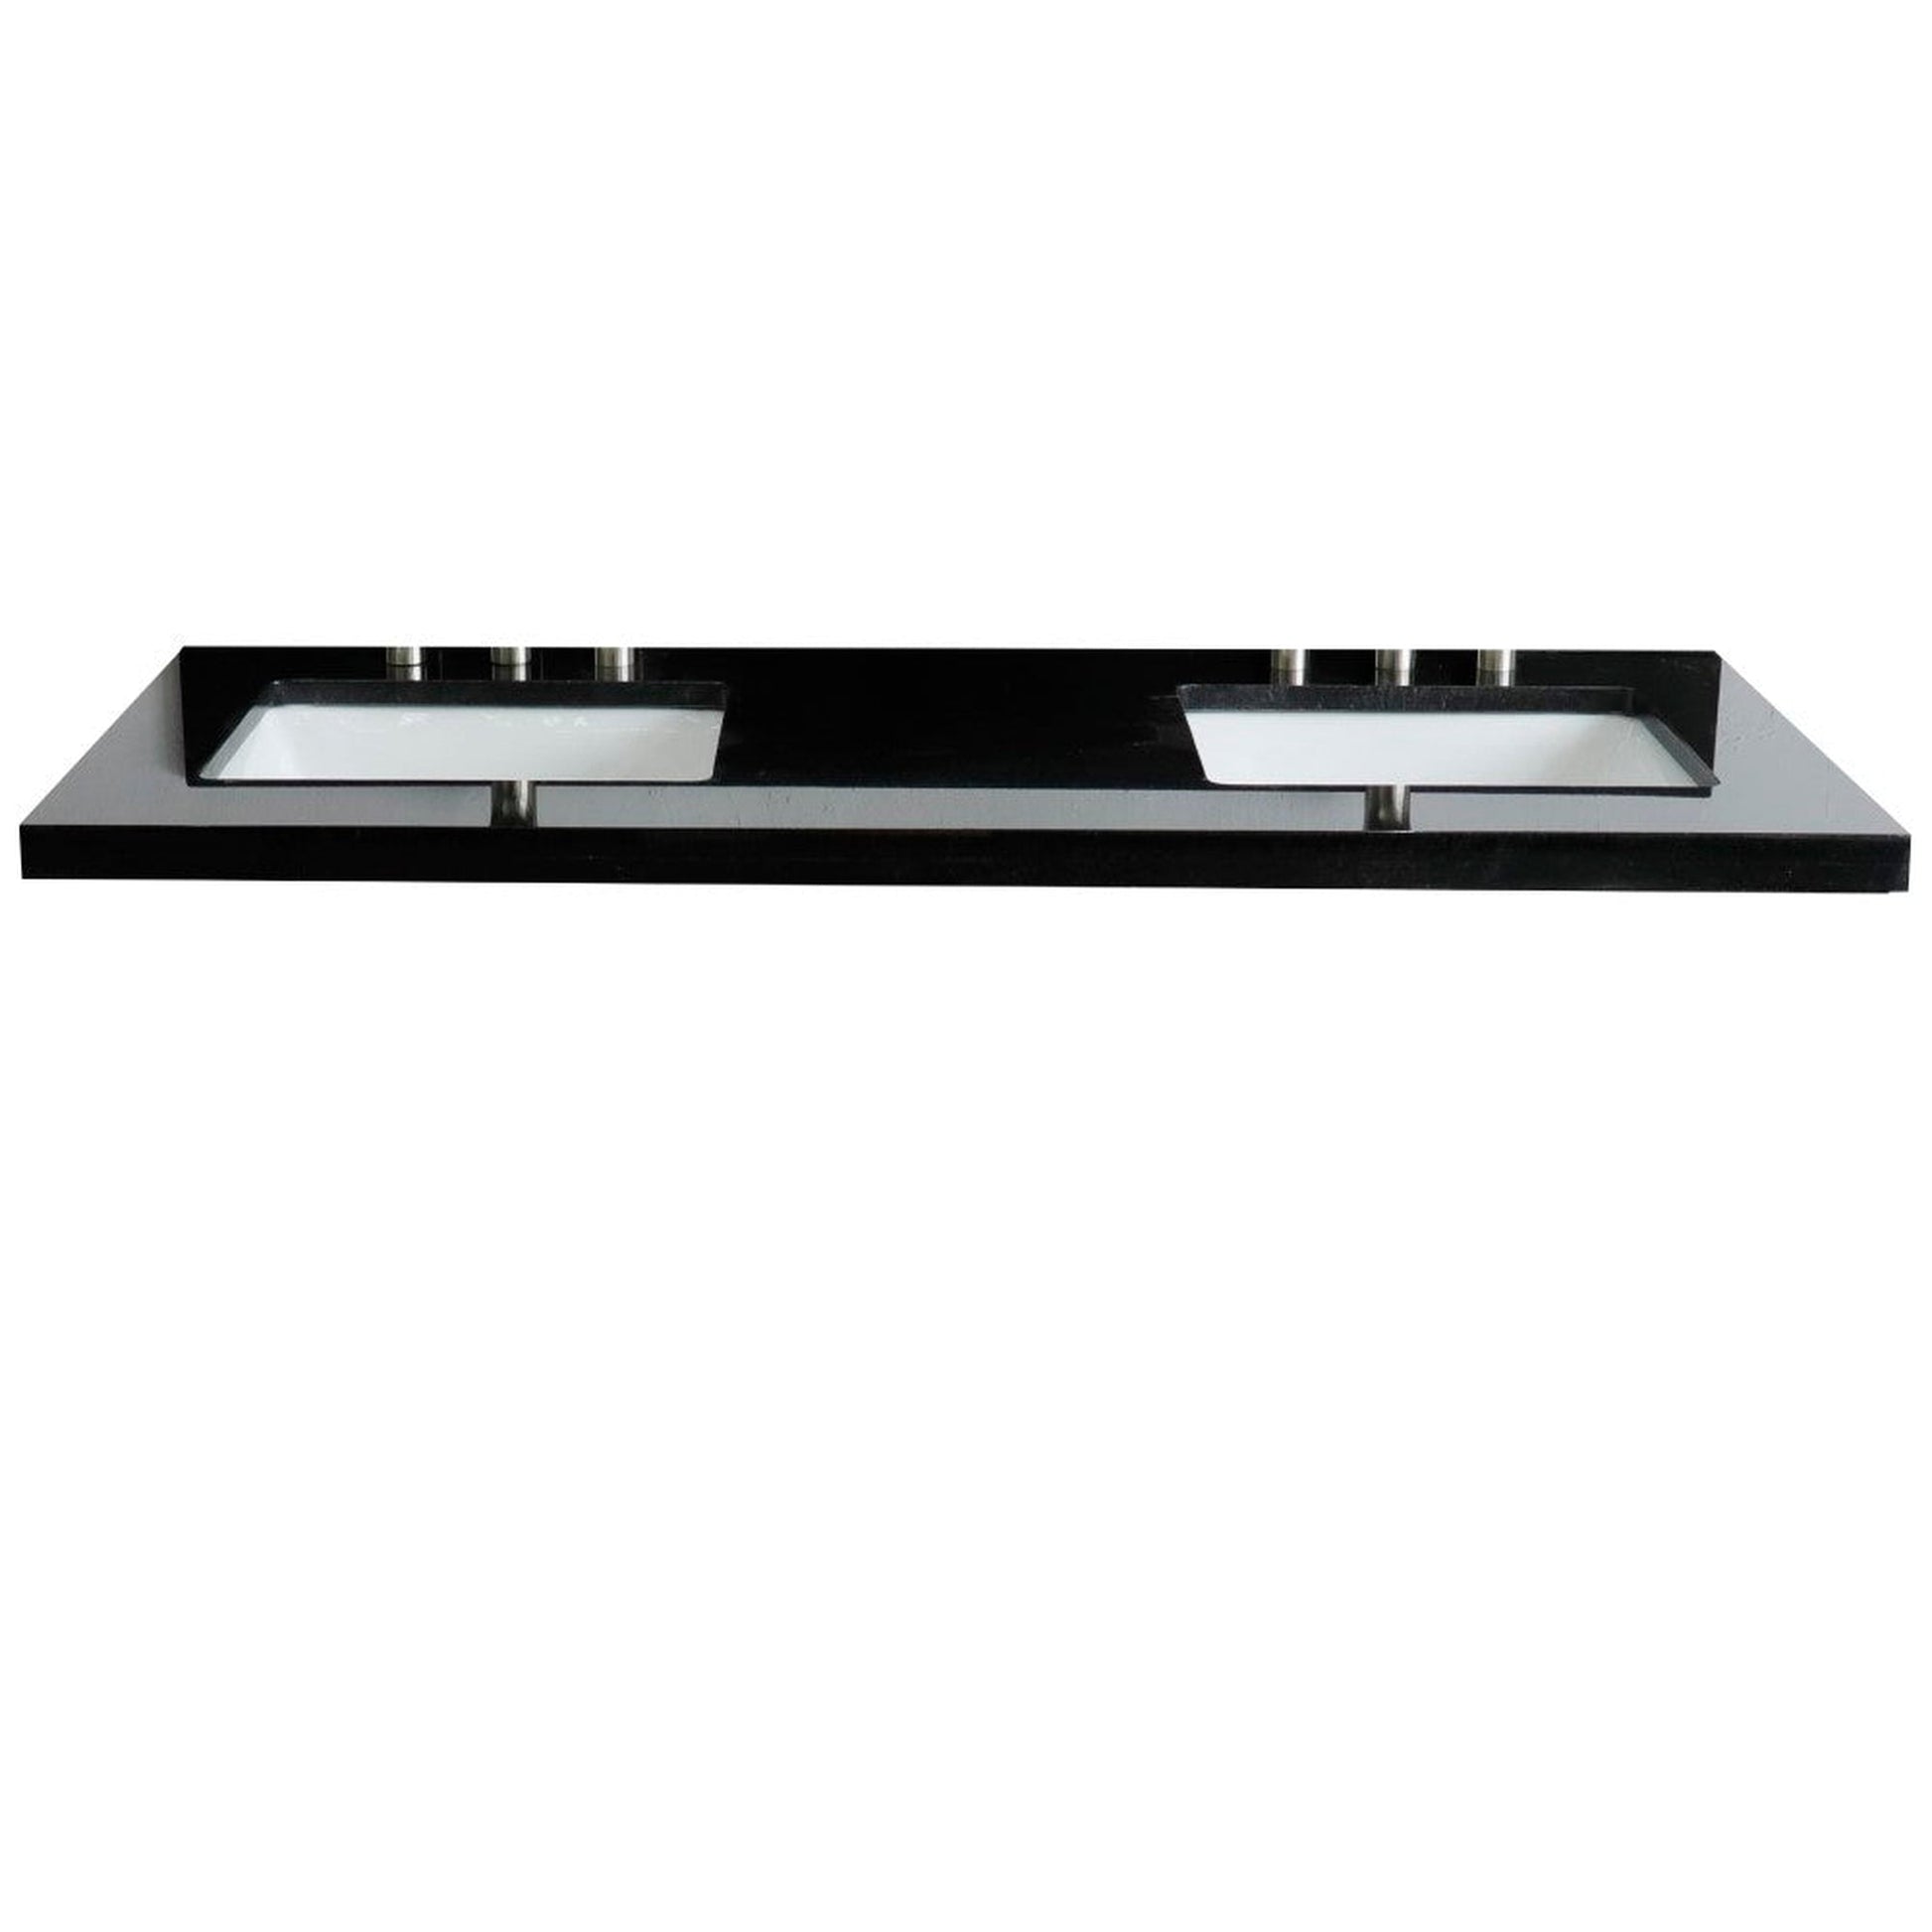 Bellaterra Home 61" x 22" Black Galaxy Granite Three Hole Vanity Top With Double Undermount Rectangular Sink and Overflow